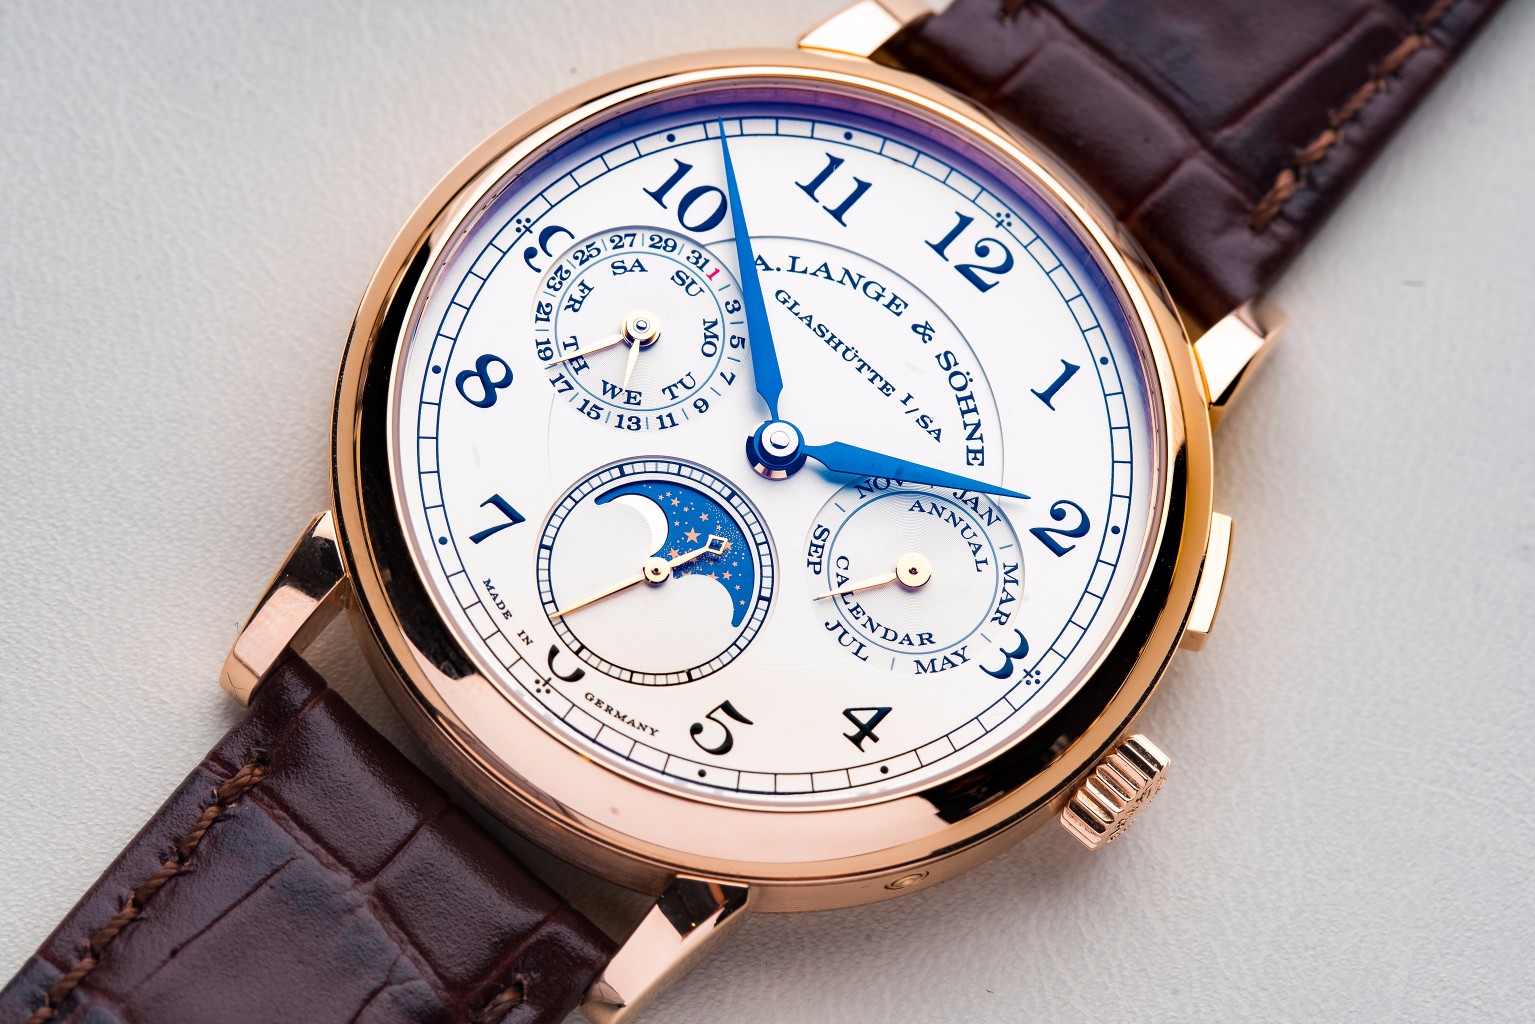 Getting Your Hands On The 2017 A. Lange & Söhne Collection